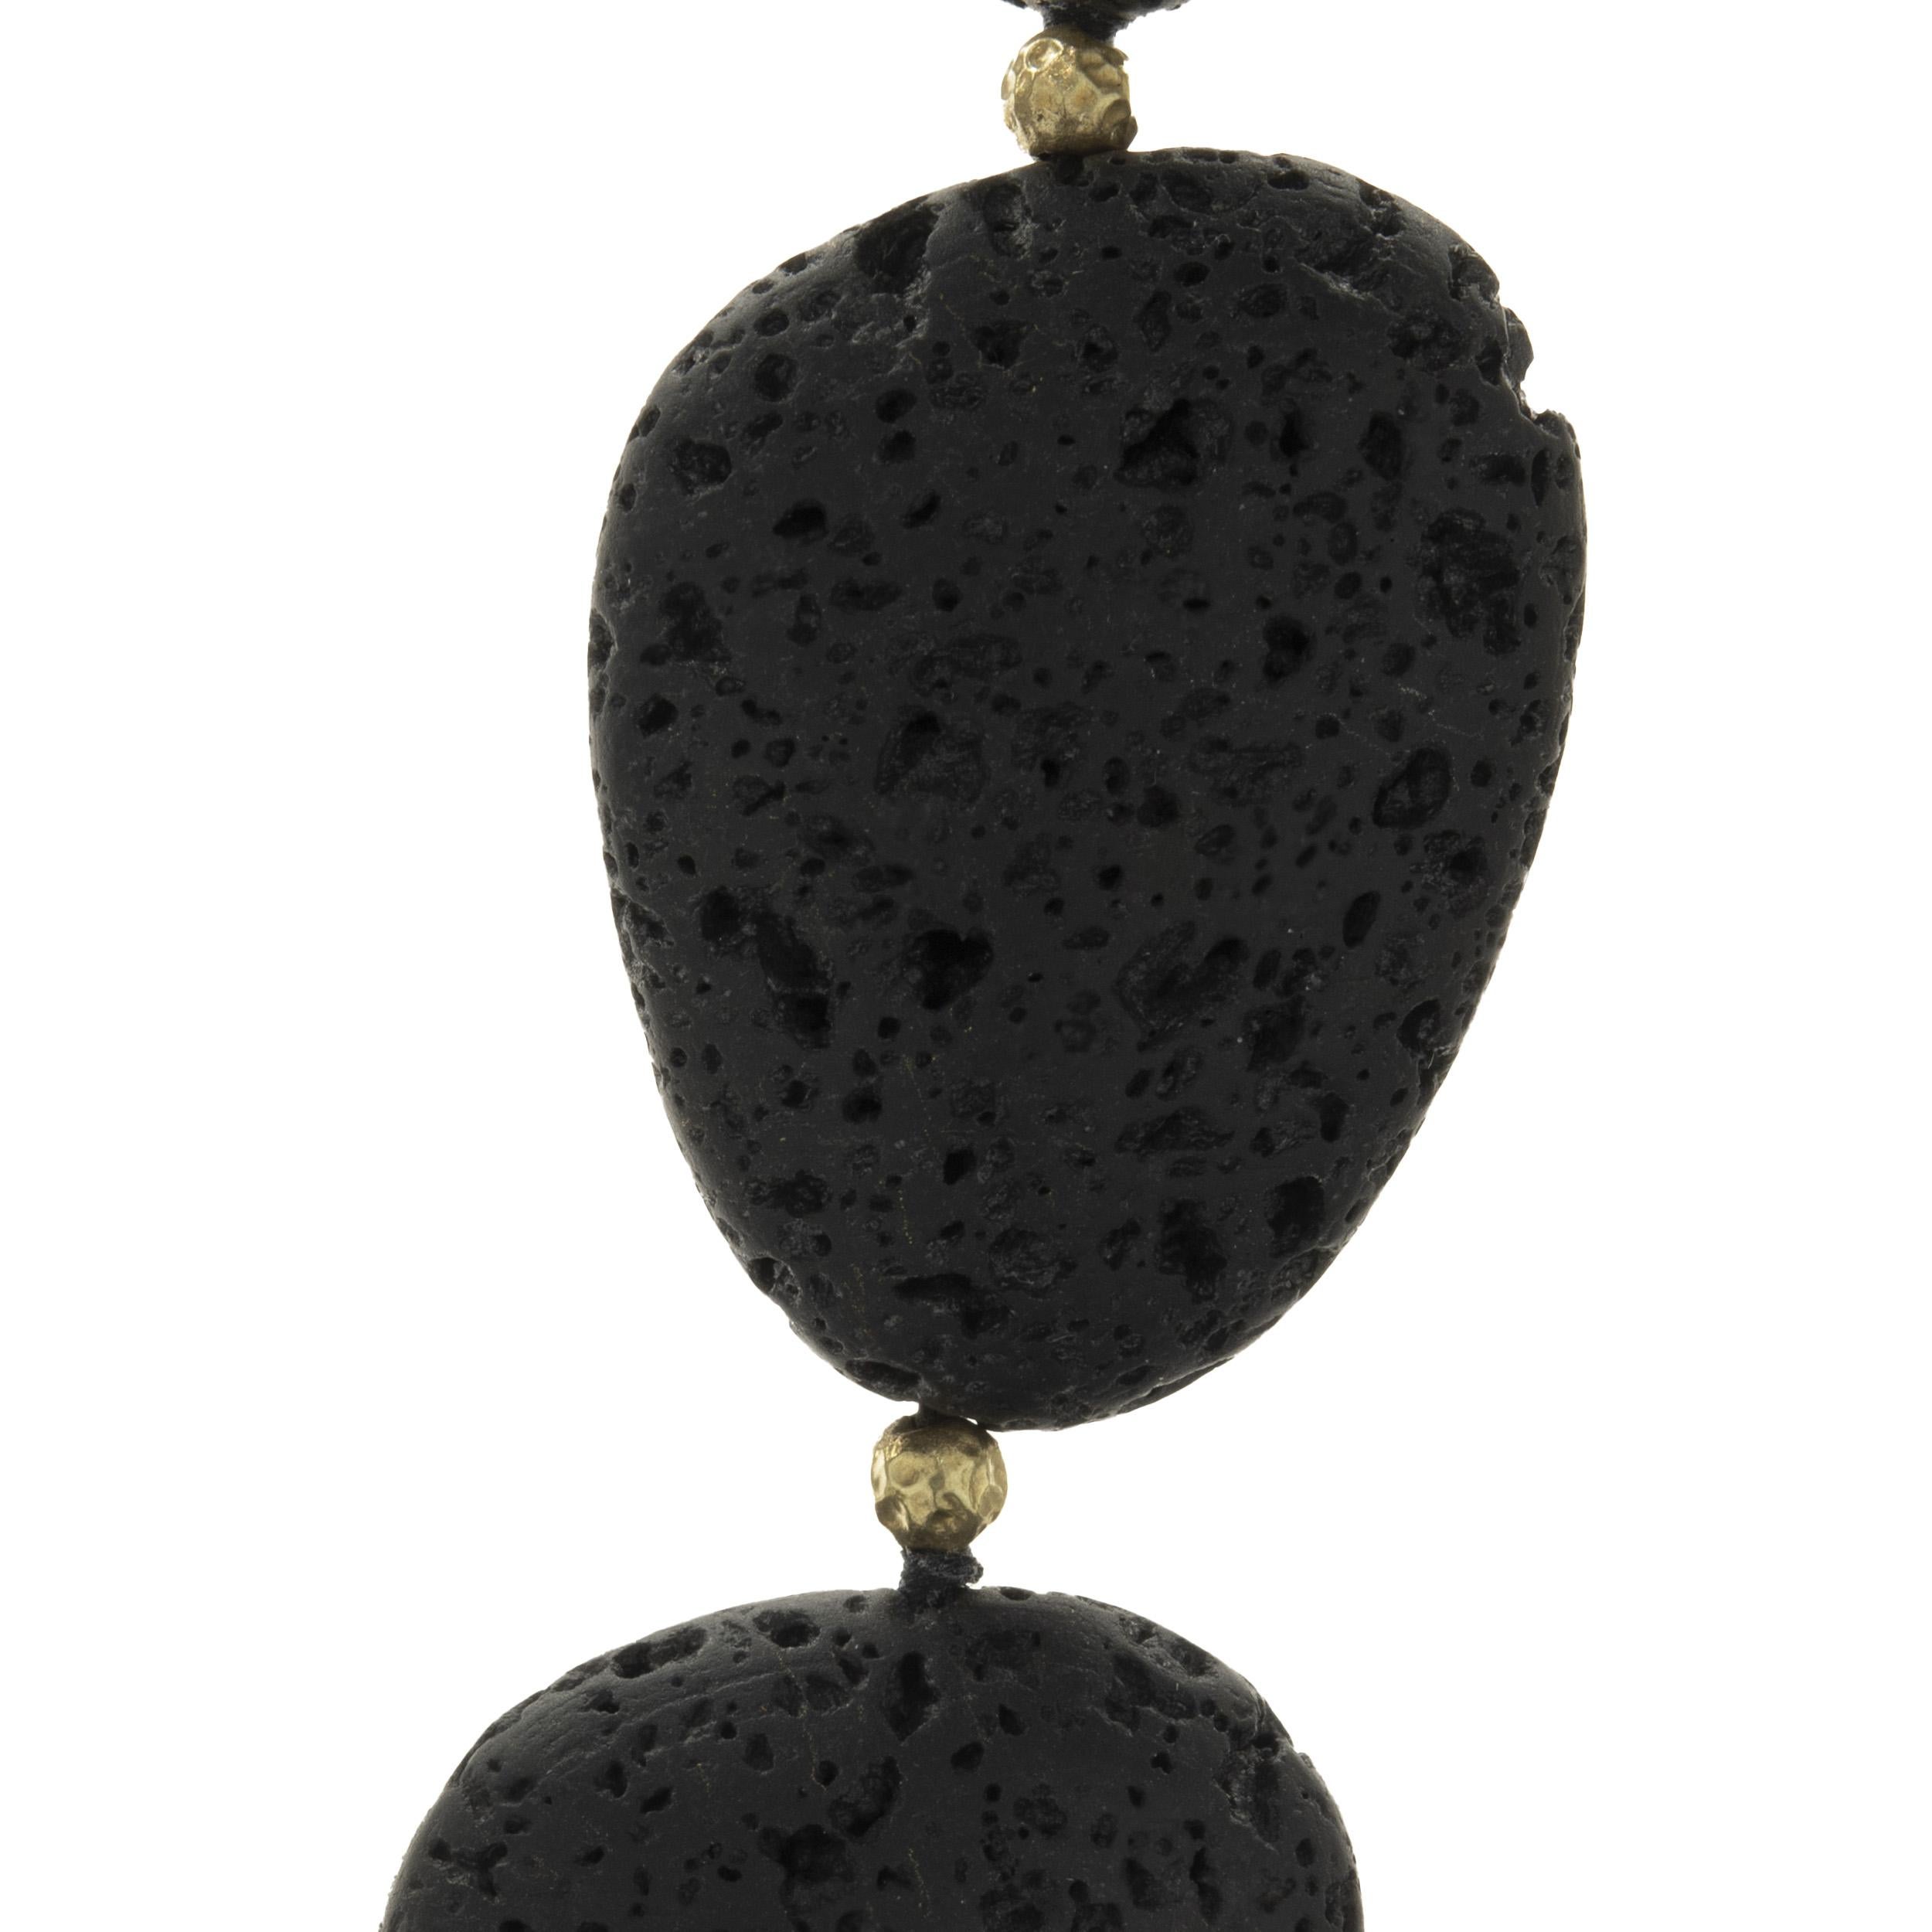 Designer: David Yurman
Material: Lava Rock / 18K yellow gold
Dimensions: necklace measures 18-inches
Weight: 187.58 grams